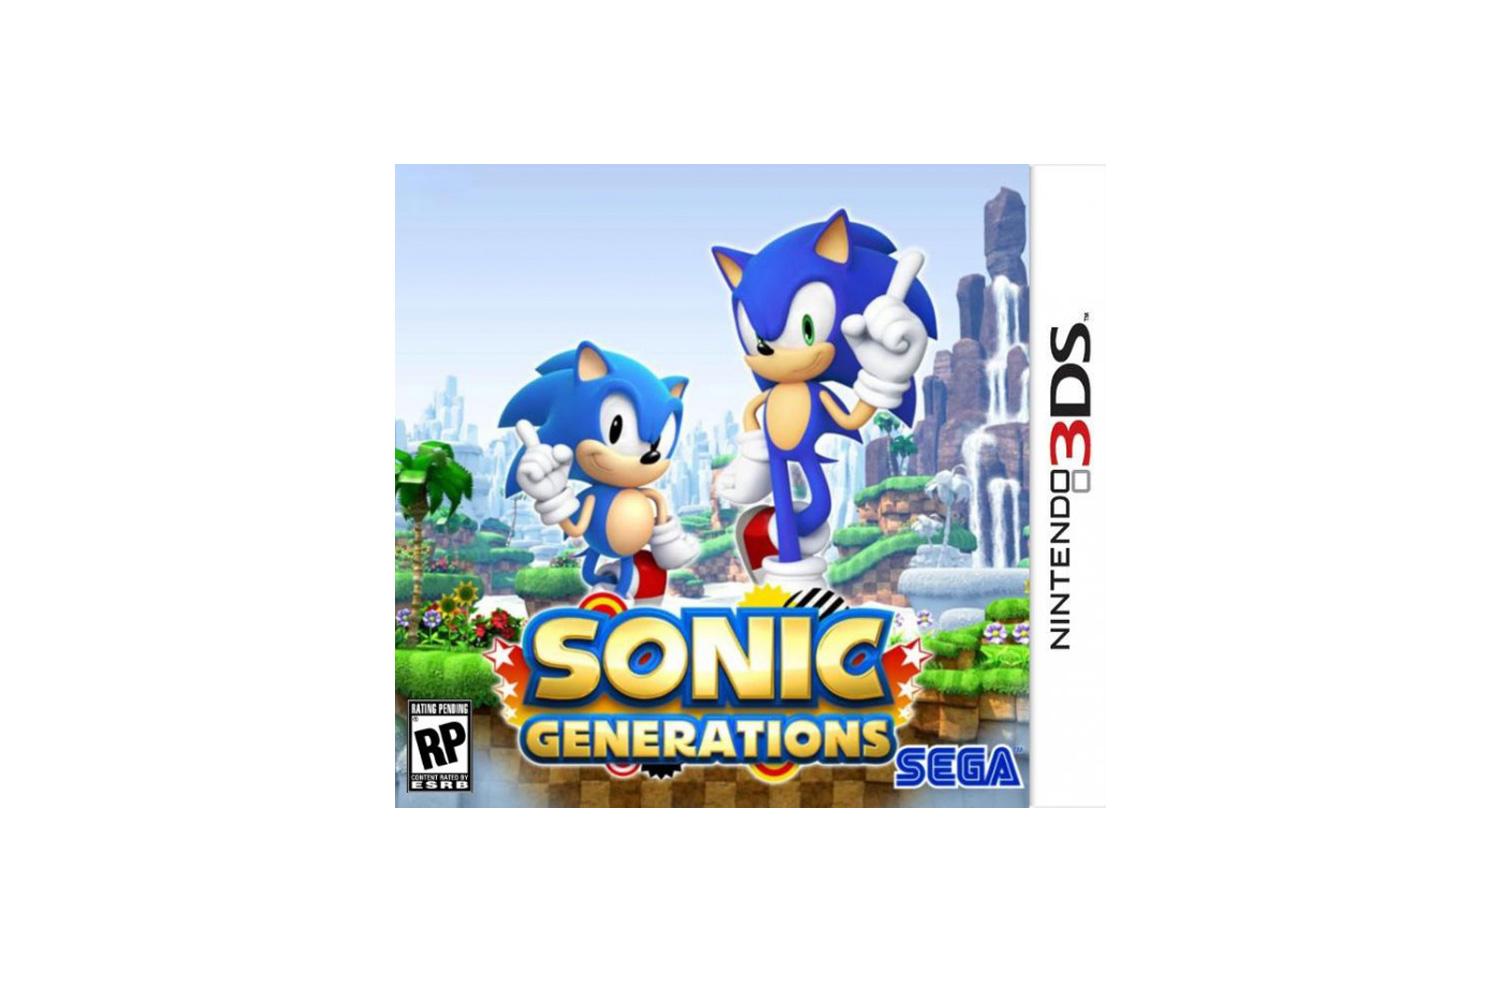 Sonic Generations Was Originally Meant To Come To Wii And DS - My